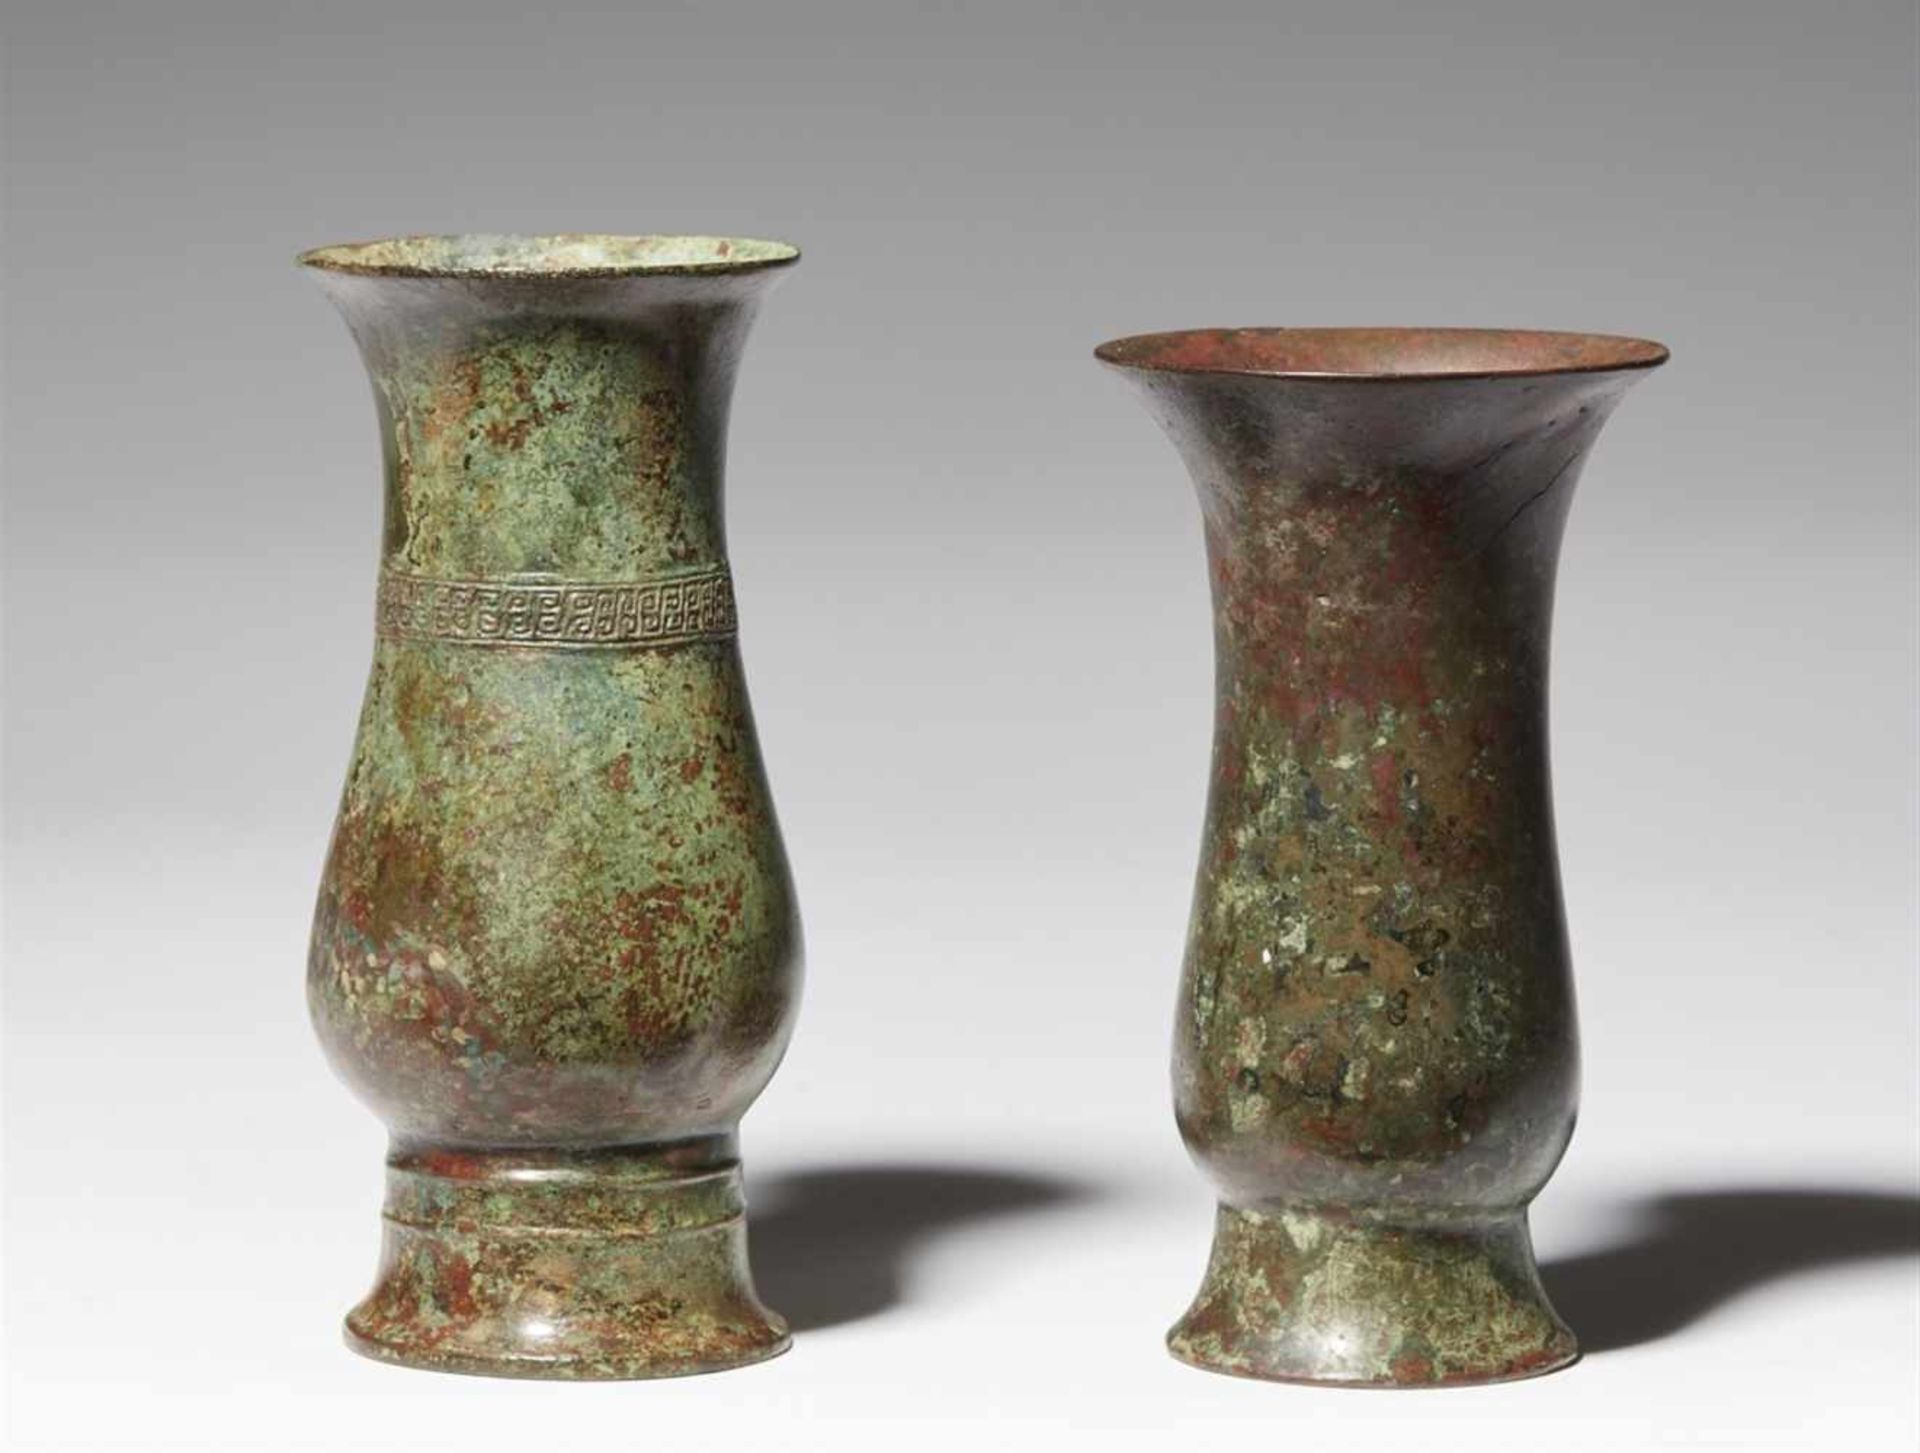 Two small bronze drinking vessels. Early Western Zhou dynasty, ca. 11./10. Jh. v. Chr.